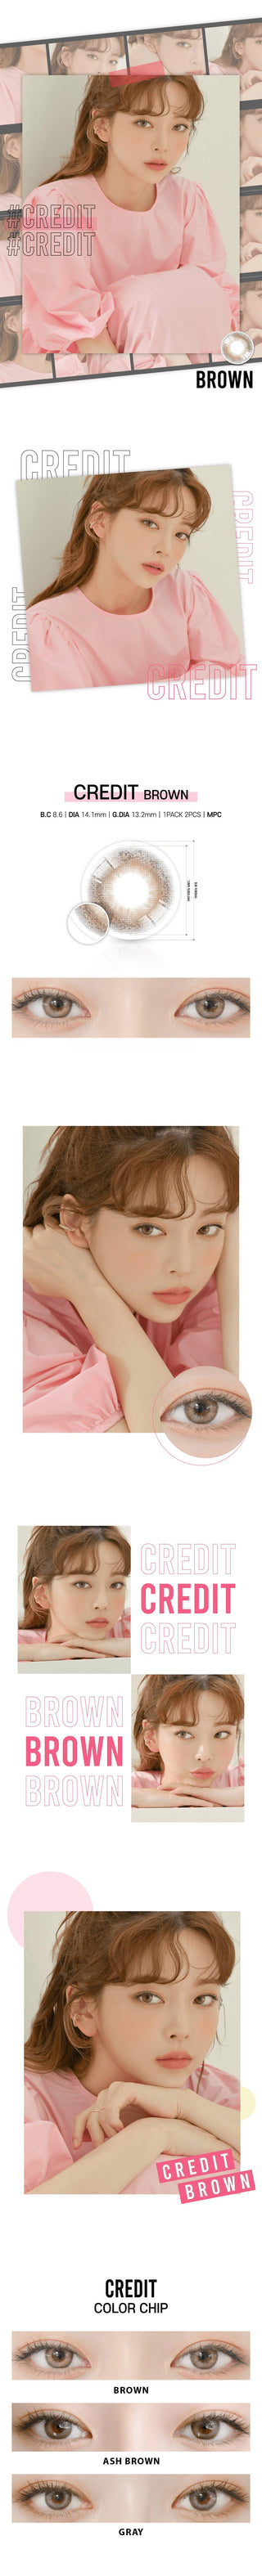 Various angles of a female Asian model wearing the Credit Brown colored contacts prescription, including close-up shots of her eyes showing the transformation of her dark eyes by the circle lenses